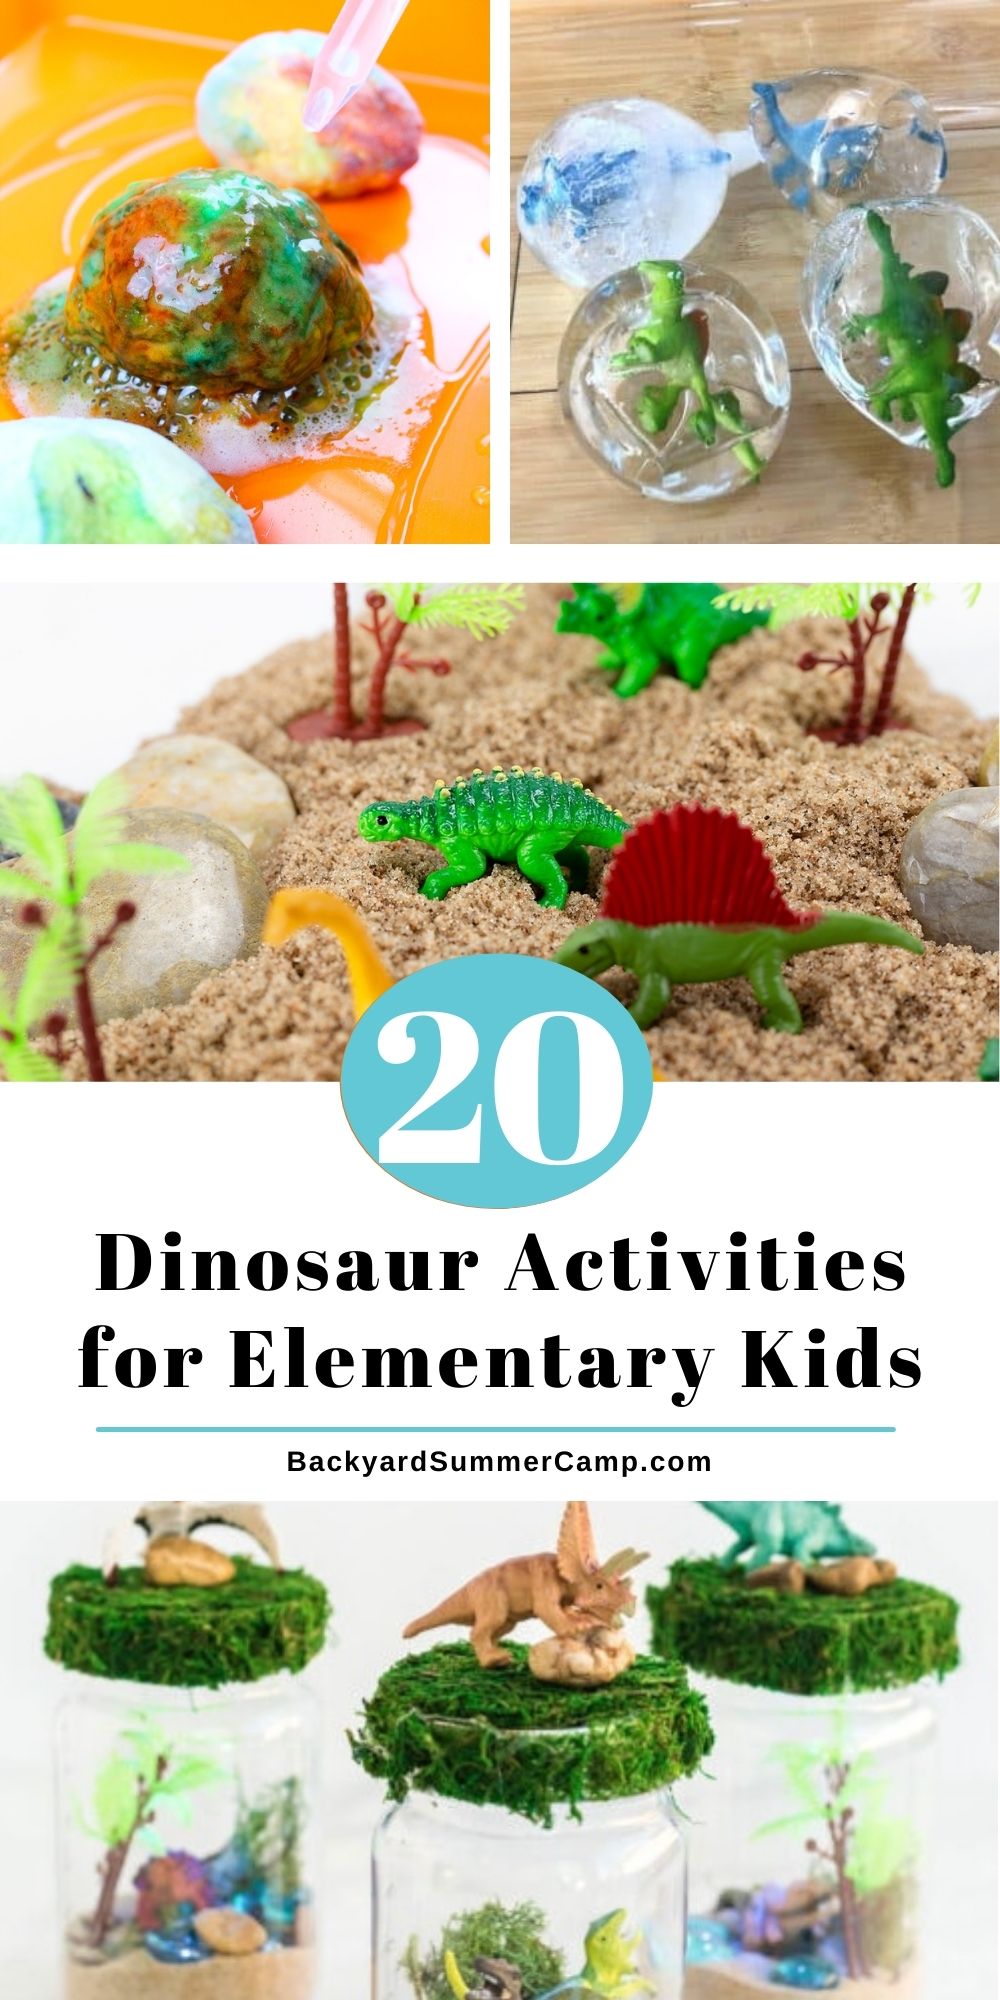 Collage of dinosaur activities for elementary kids including fizzing eggs, ice excavation, a sensory bin, and terrarium night light.